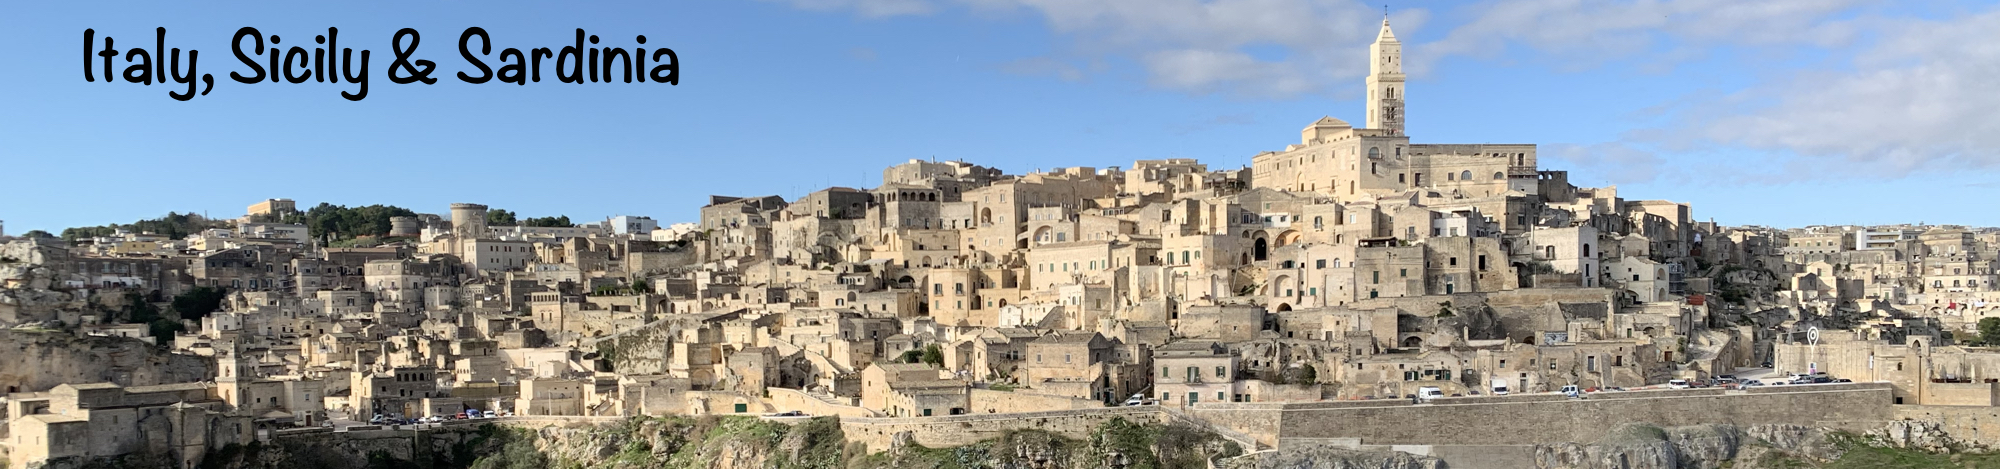 Title for Italy, Sicily and Sardinia trip - Matera hill-top town.